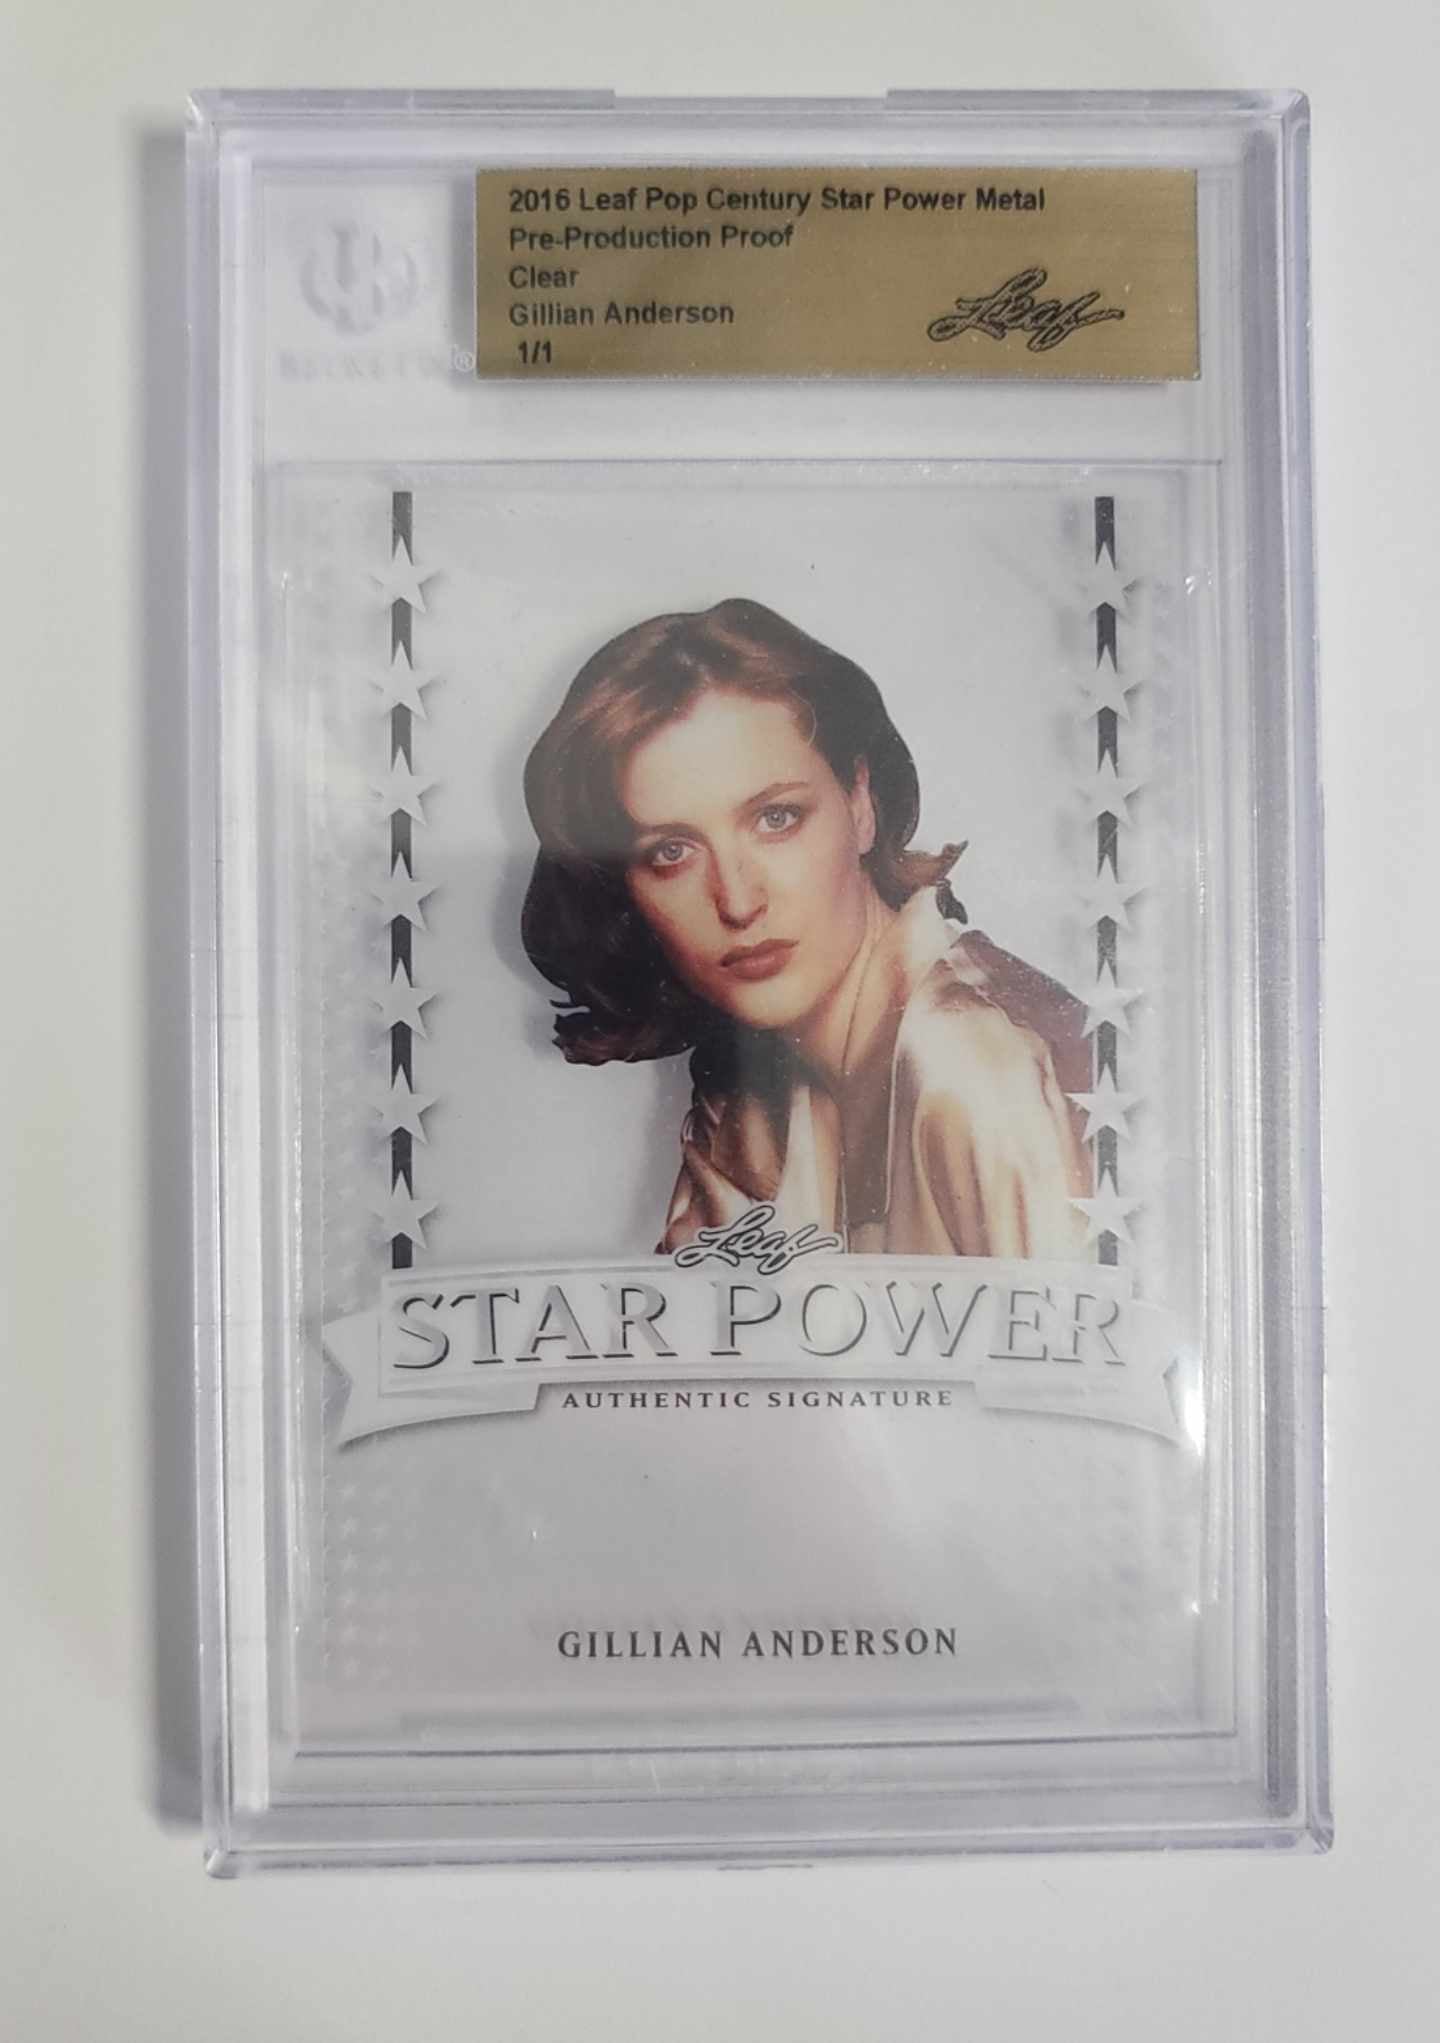 Gillian Anderson Star Power - Leaf Pop Centuries Pre-Production Proof